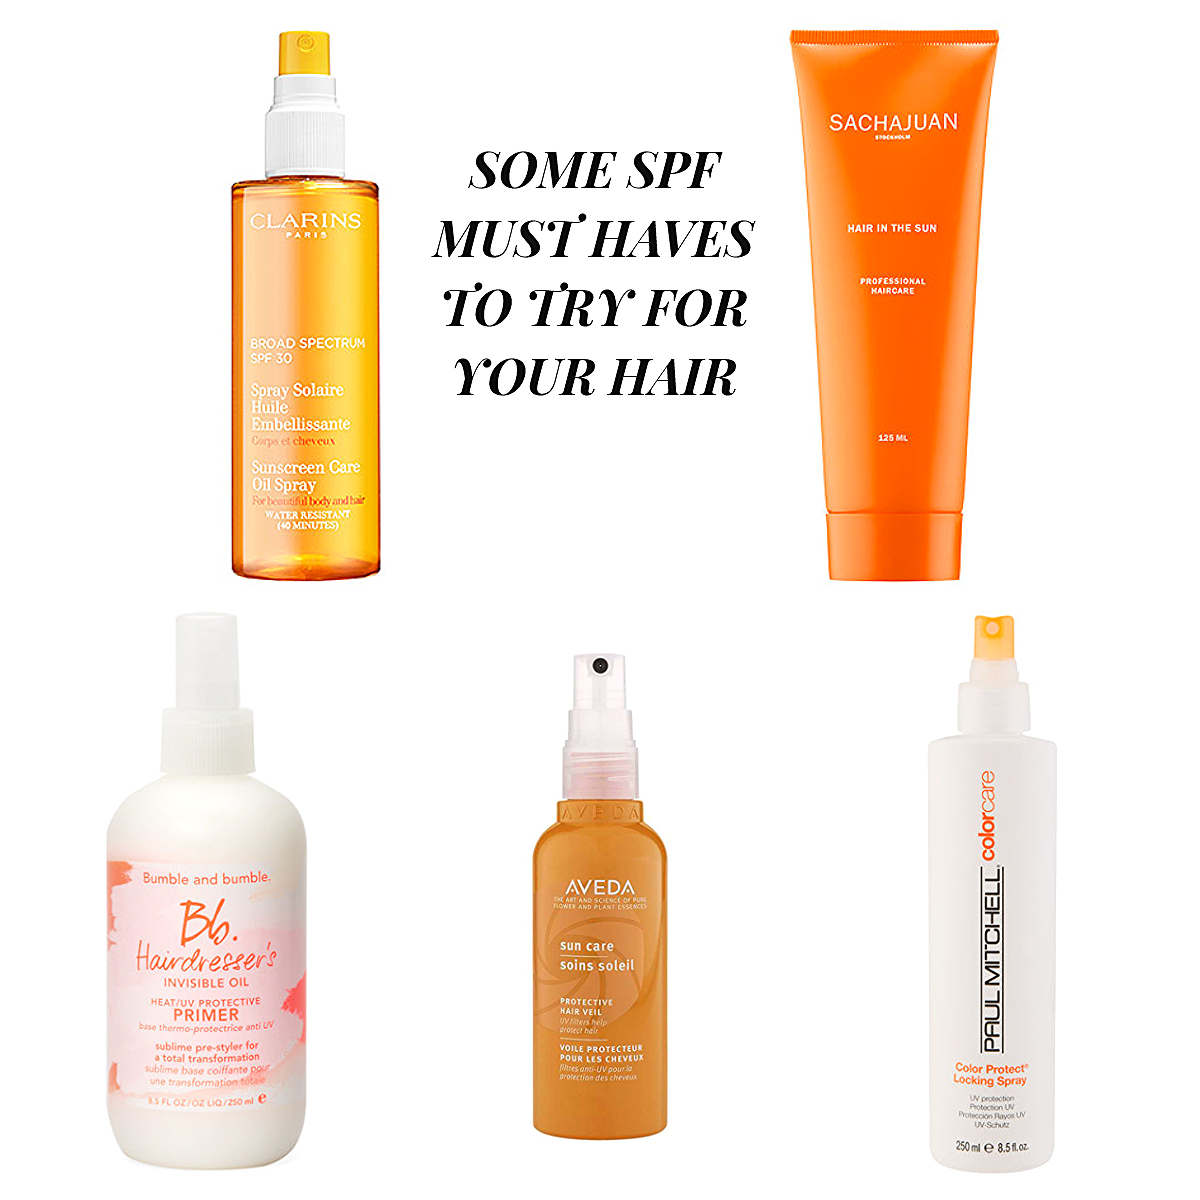 DO YOU REALLY NEED SPF FOR YOUR HAIR?